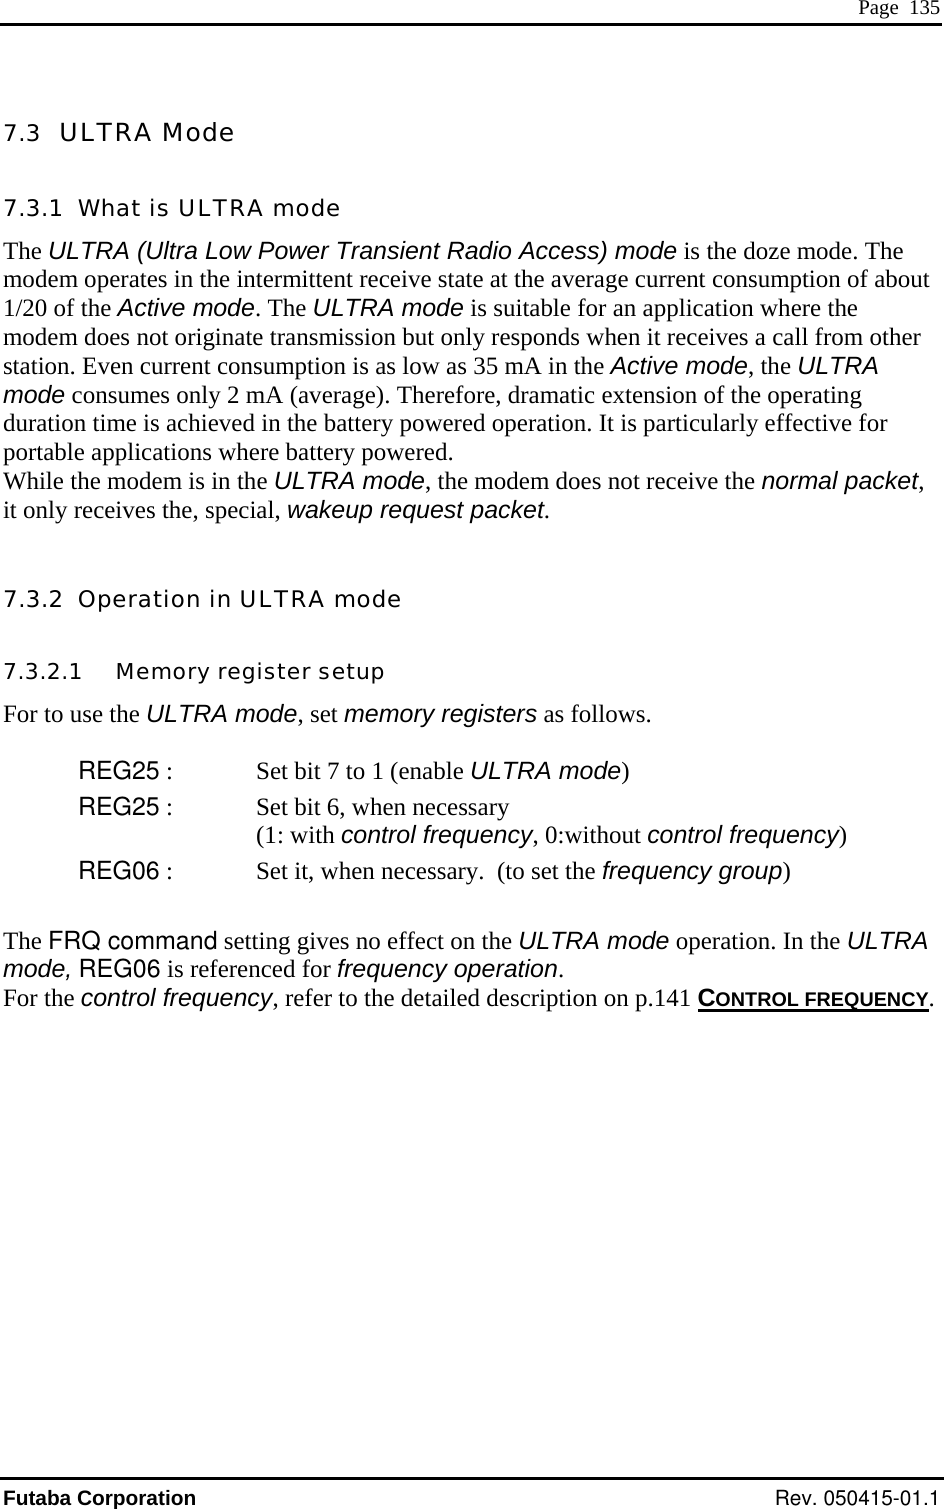  Page  135 7.3  ULTRA Mode 7.3.1  What is ULTRA mode he ULTRA (Ultra Low Power Transient Radio Access) mode is the doze mode. The odem operates in the intermittent receive state at the average current consumption of about /20 of the Active mode. The ULTRA mode is suitable for an application where the odem does not originate transmission but only responds when it receives a call from other tation. Even current consumption is as low as 35 mA in the Active mode, the ULTRA ode consumes only 2 mA (average). Therefore, dramatic extension of the operating uration time is achieved in the battery powered operation. It is particularly effective for ortable applications where battery powered. hile the modem is in the ULTRA mode, the modem does not receive the normal packet,  only receives the, special, wakeup request packet. .3.2  Operation in ULTRA mode .3.2.1   Memory register setup or to use the ULTRA mode, set memory registers as follows. REG25 :  Set bit 7 to 1 (enable ULTRA mode) REG25 :   Set bit 6, when necessary (1: with control frequency, 0:without control frequency) REG06 :  up)  A Tm1msmdpWit 77F Set it, when necessary.  (to set the frequency groThe FRQ command setting gives no effect on the ULTRA mode operation. In the ULTRmode, REG06 is referenced for frequency operation. For the control frequency, refer to the detailed description on p.141 CONTROL FREQUENCY.Futaba Corporation Rev. 050415-01.1 